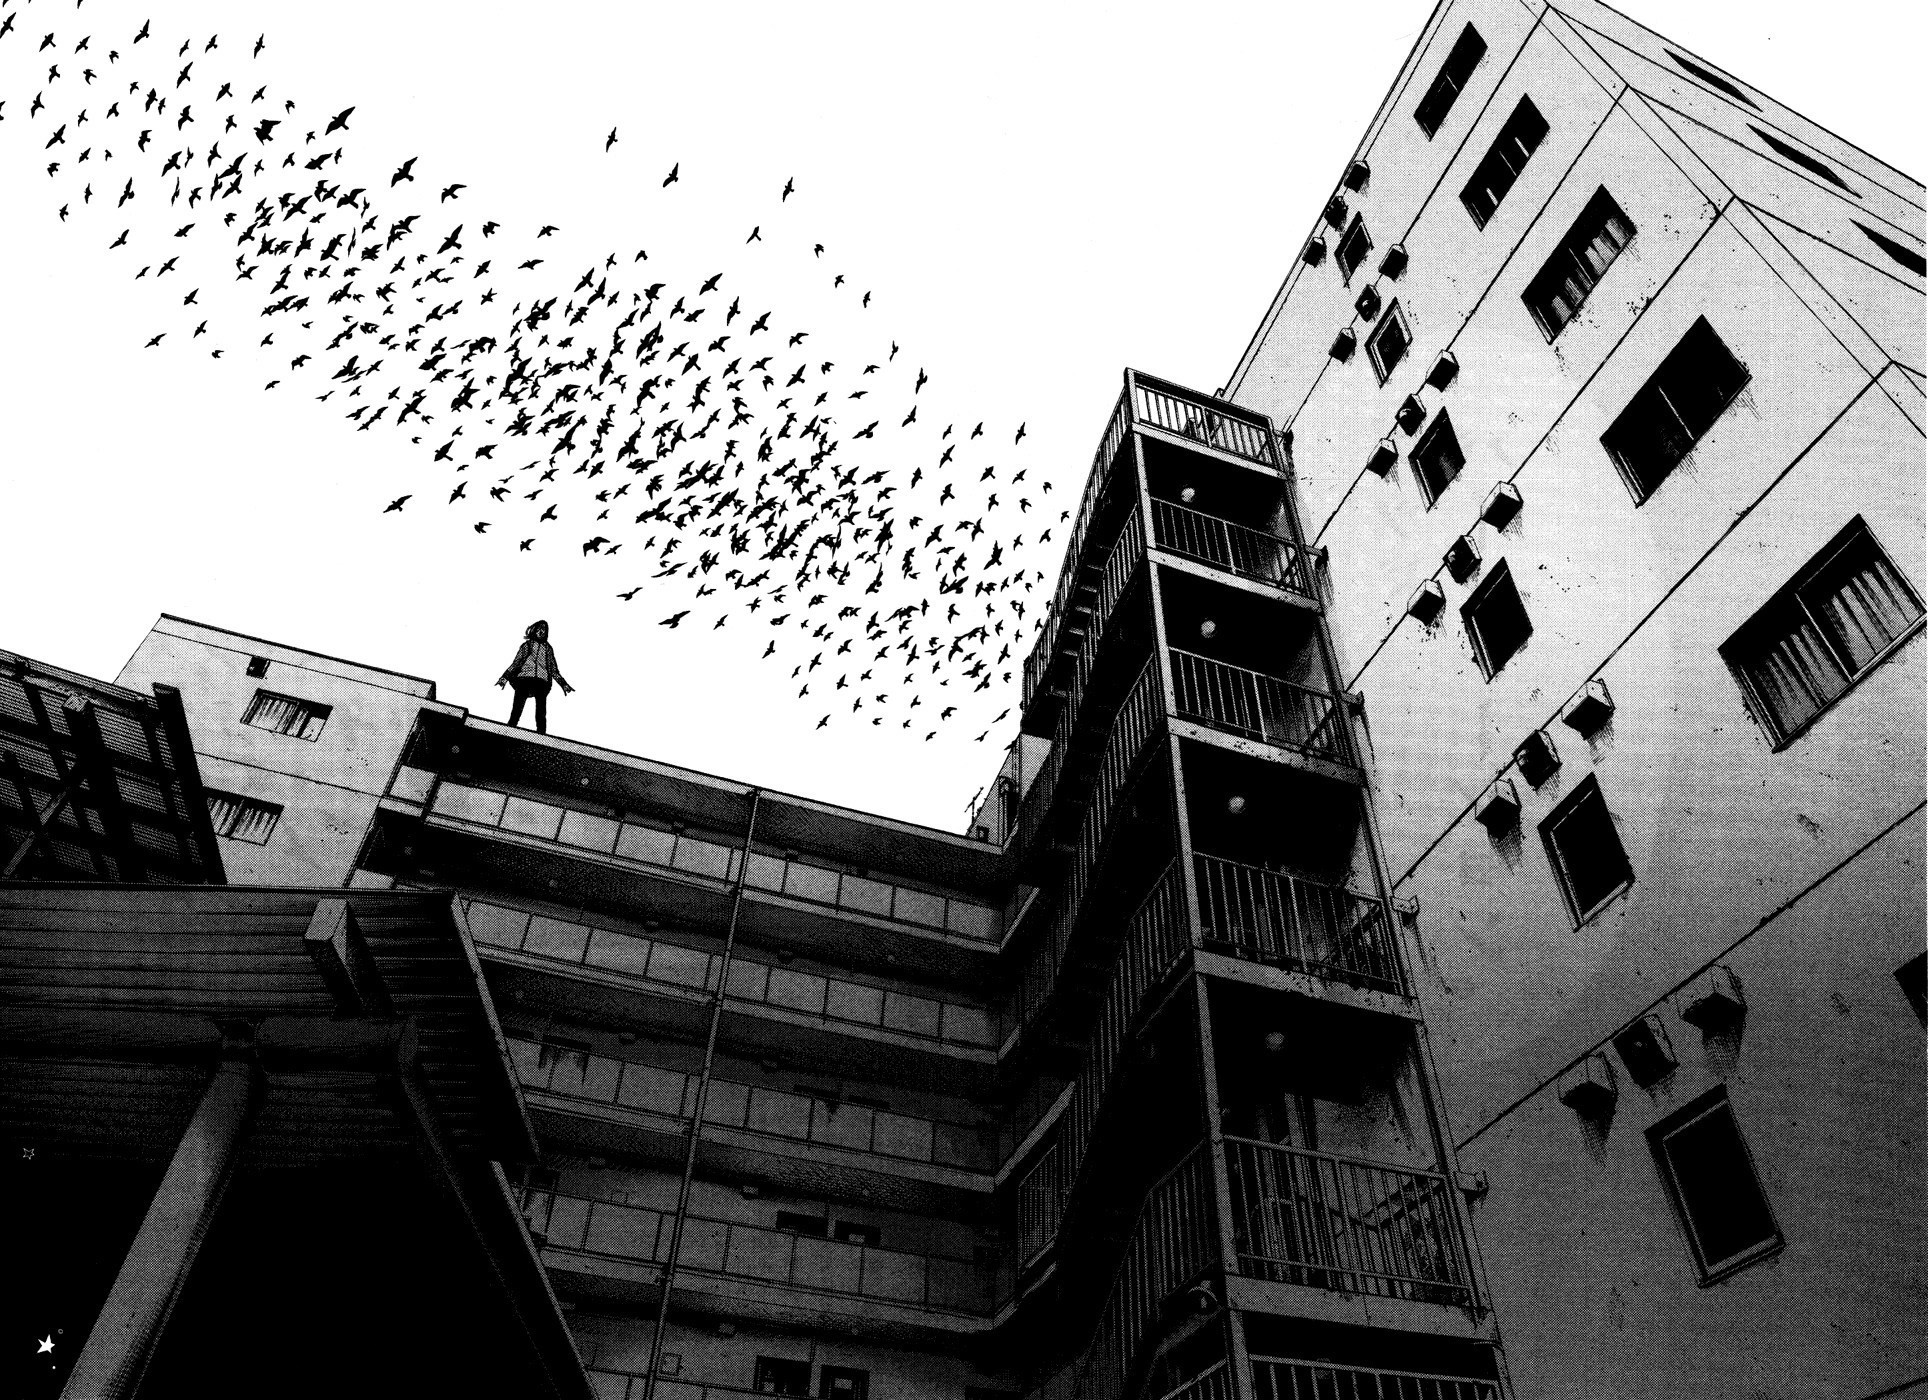 General 1928x1400 building birds monochrome animals rooftops sky low-angle standing